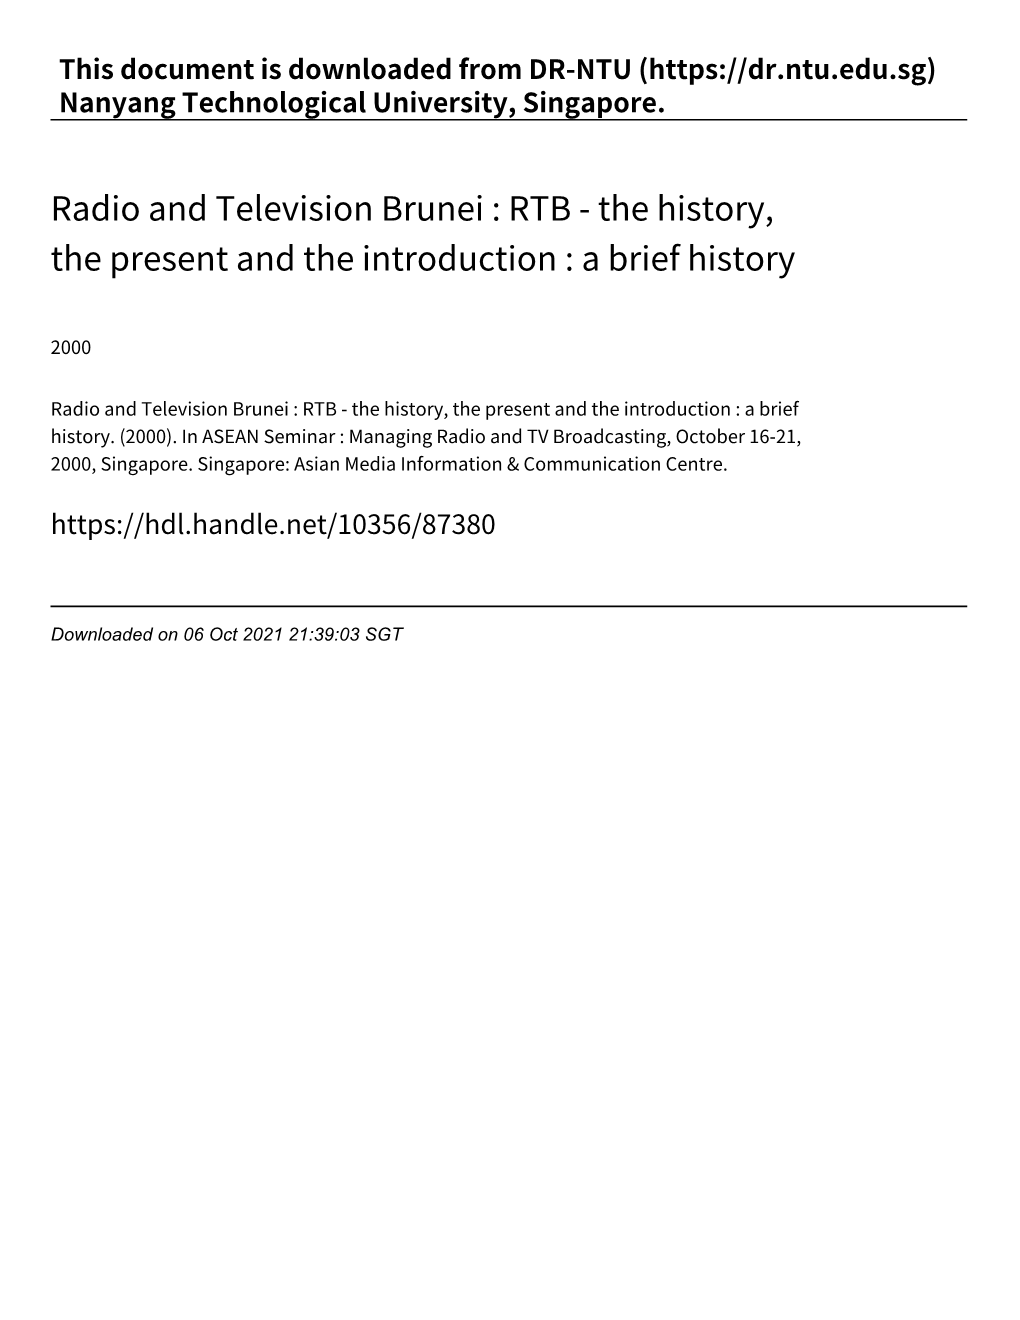 Radio and Television Brunei : RTB ‑ the History, the Present and the Introduction : a Brief History